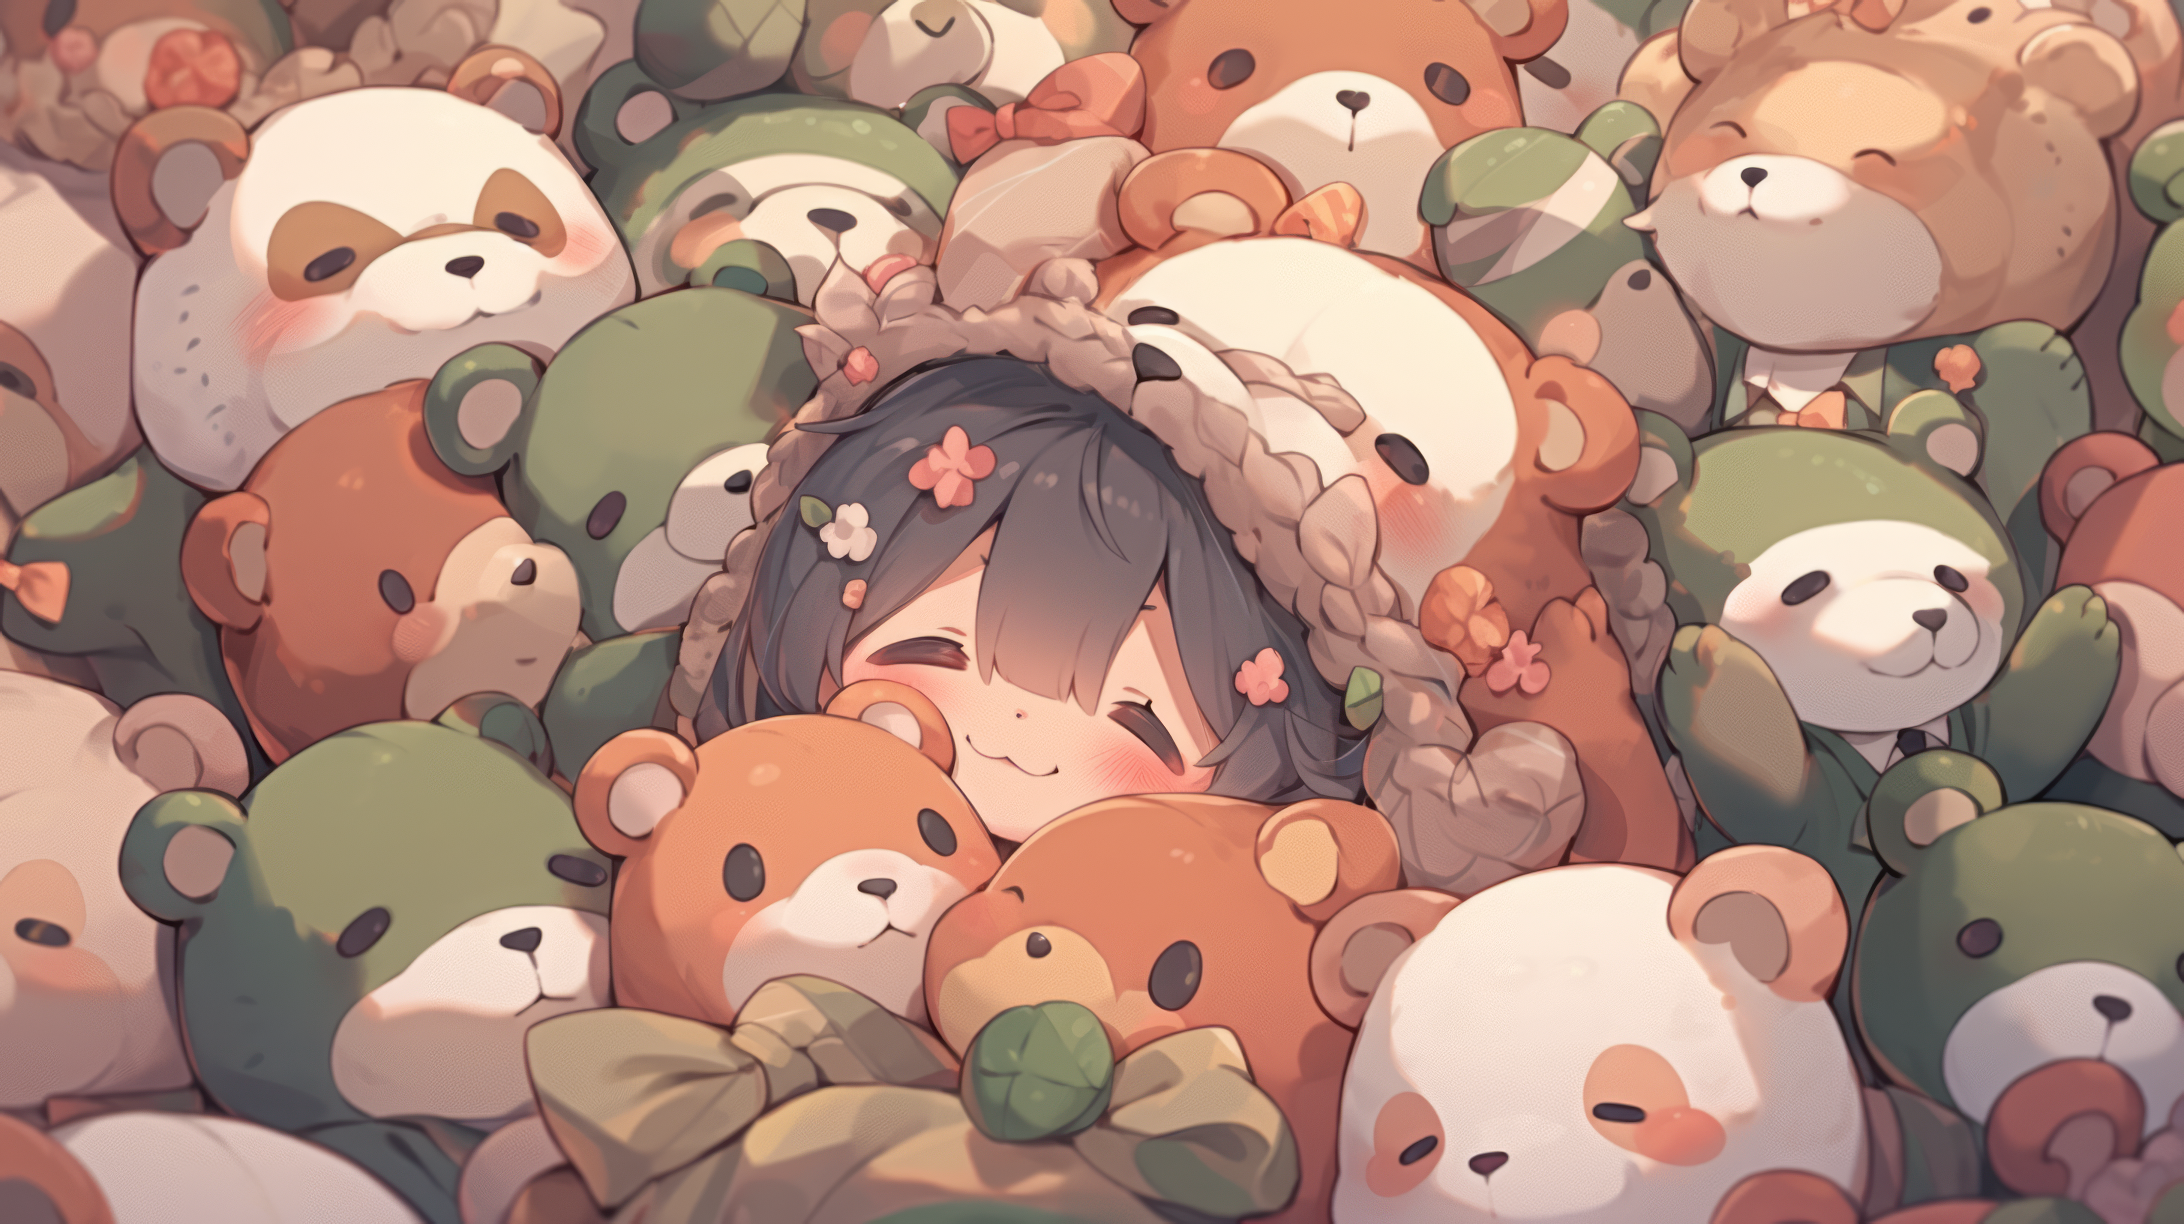 HD desktop wallpaper of a happy person surrounded by cute stuffed bears in soft pastel tones, perfect for a cozy background.